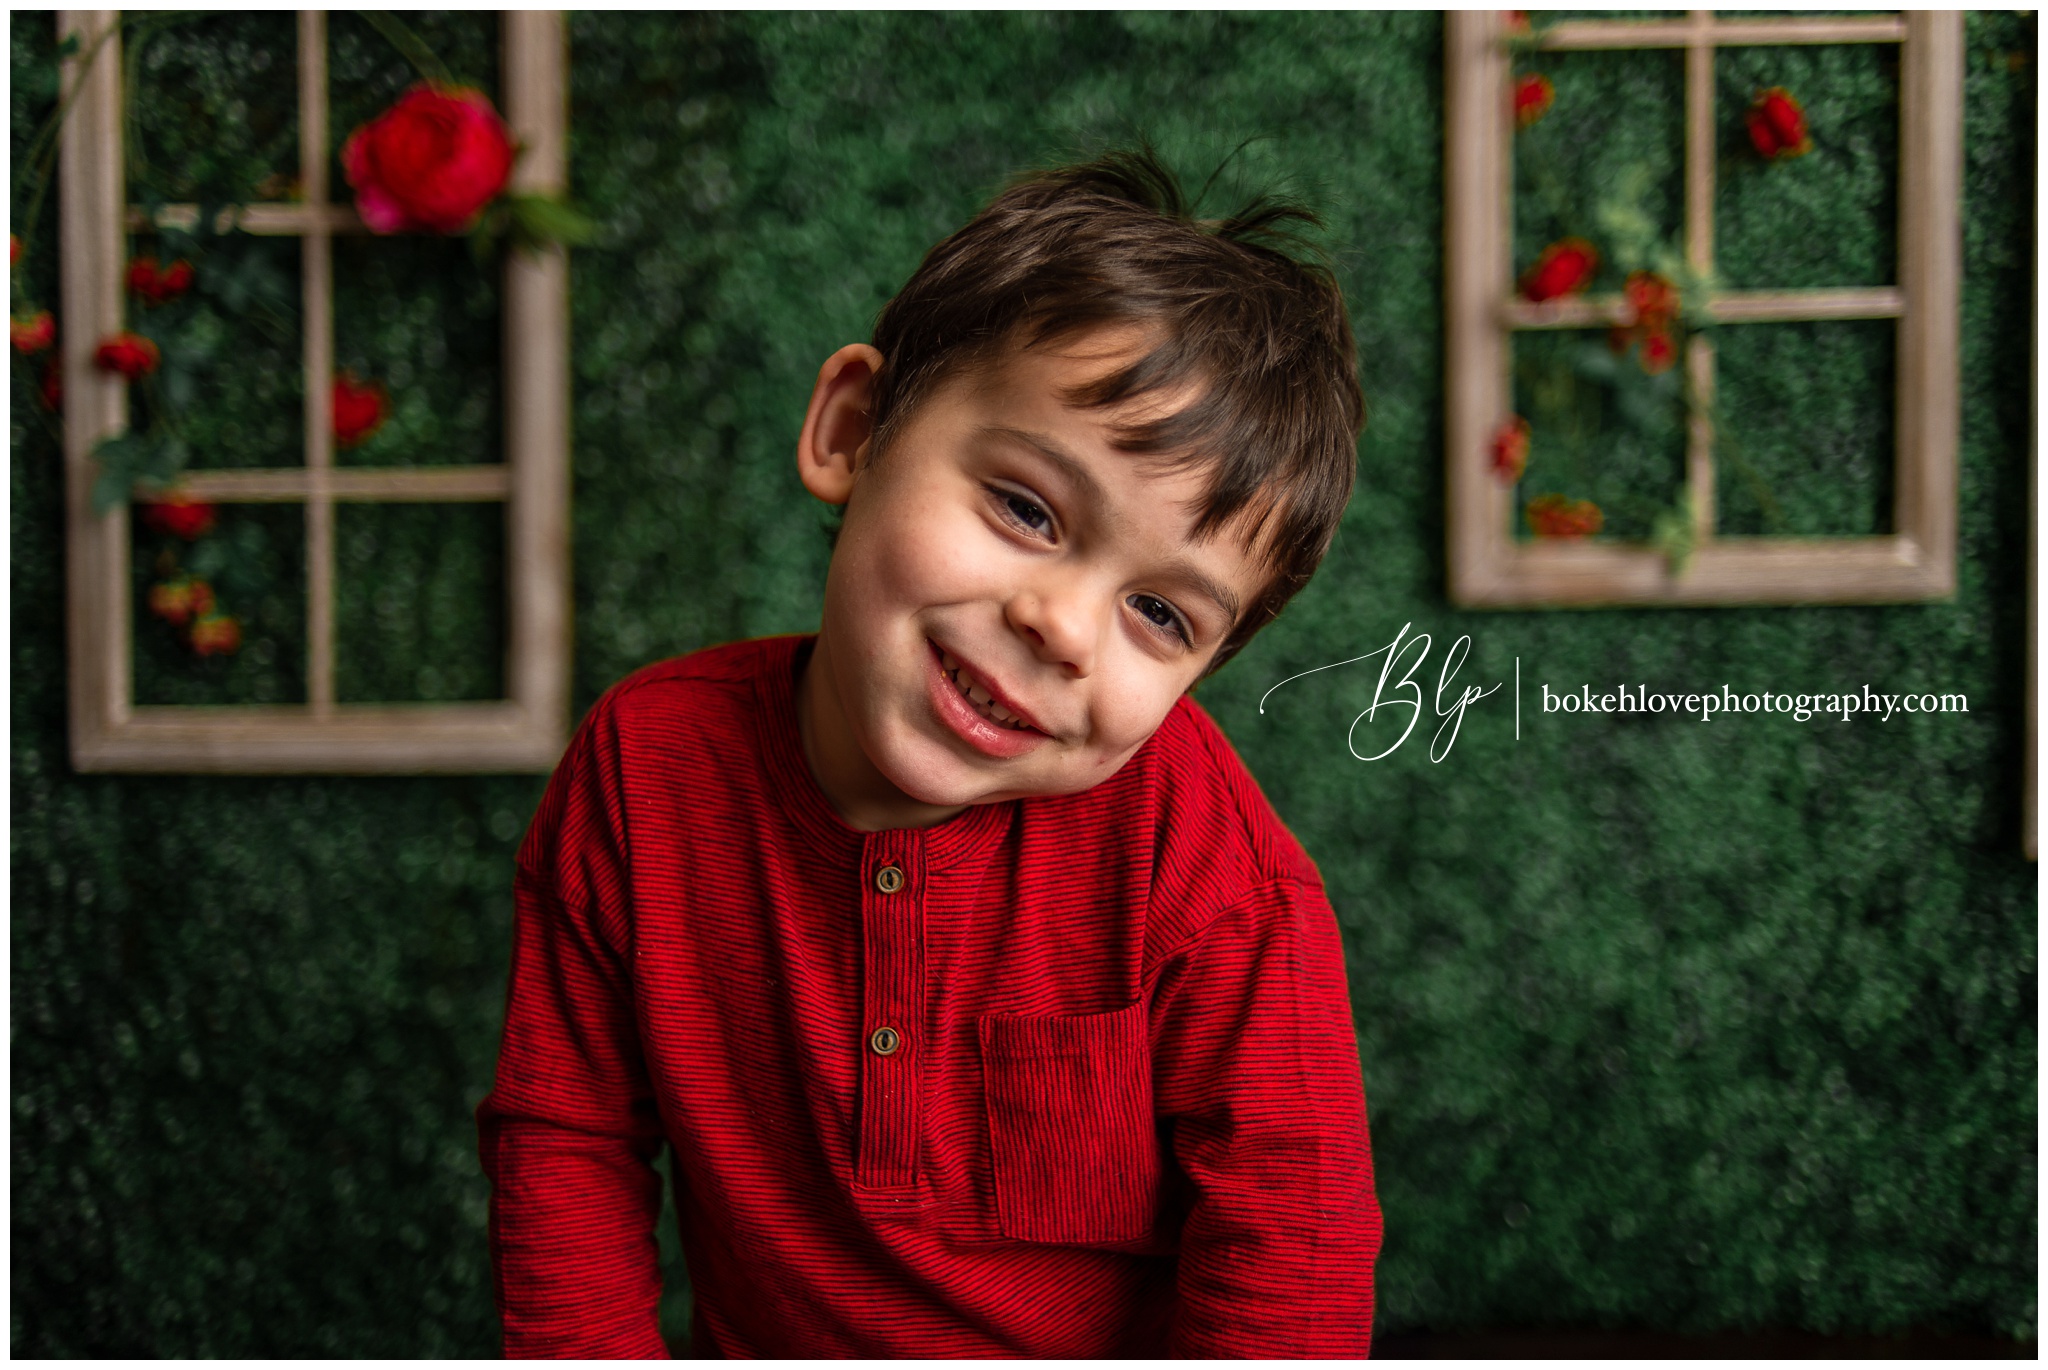 Bokeh Love Photography, Valentine Mini Sessions in Galloway NJ